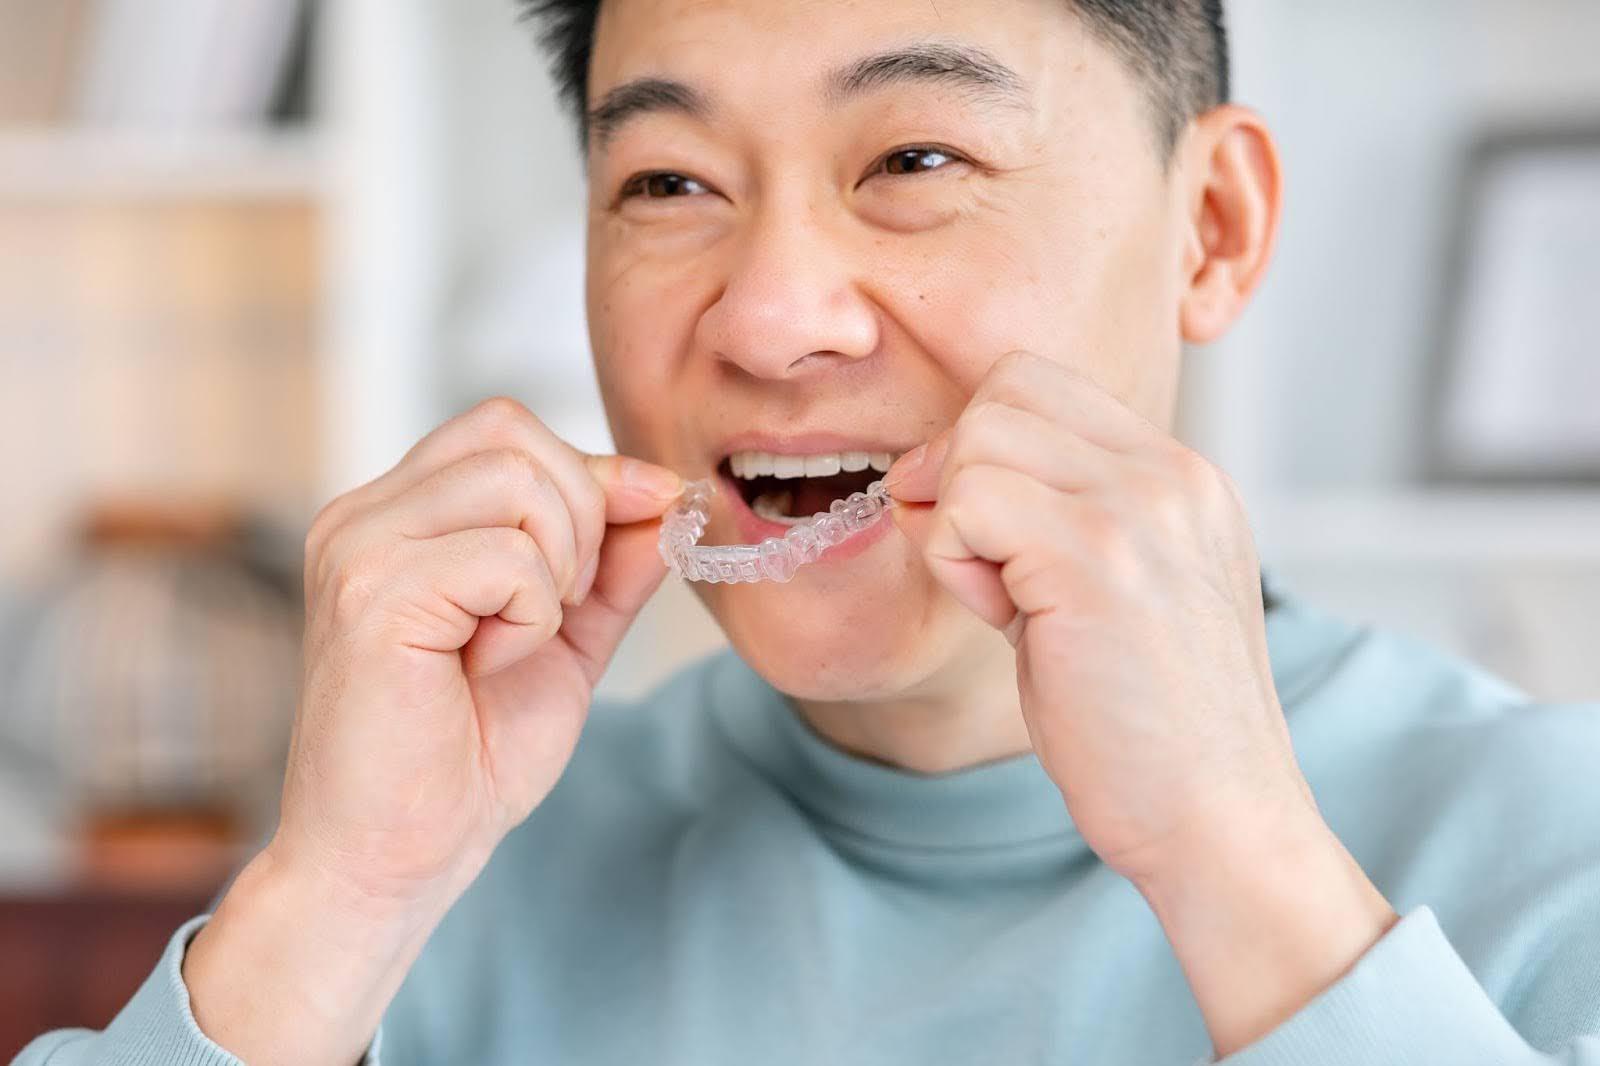 How to Use Invisalign Chewies